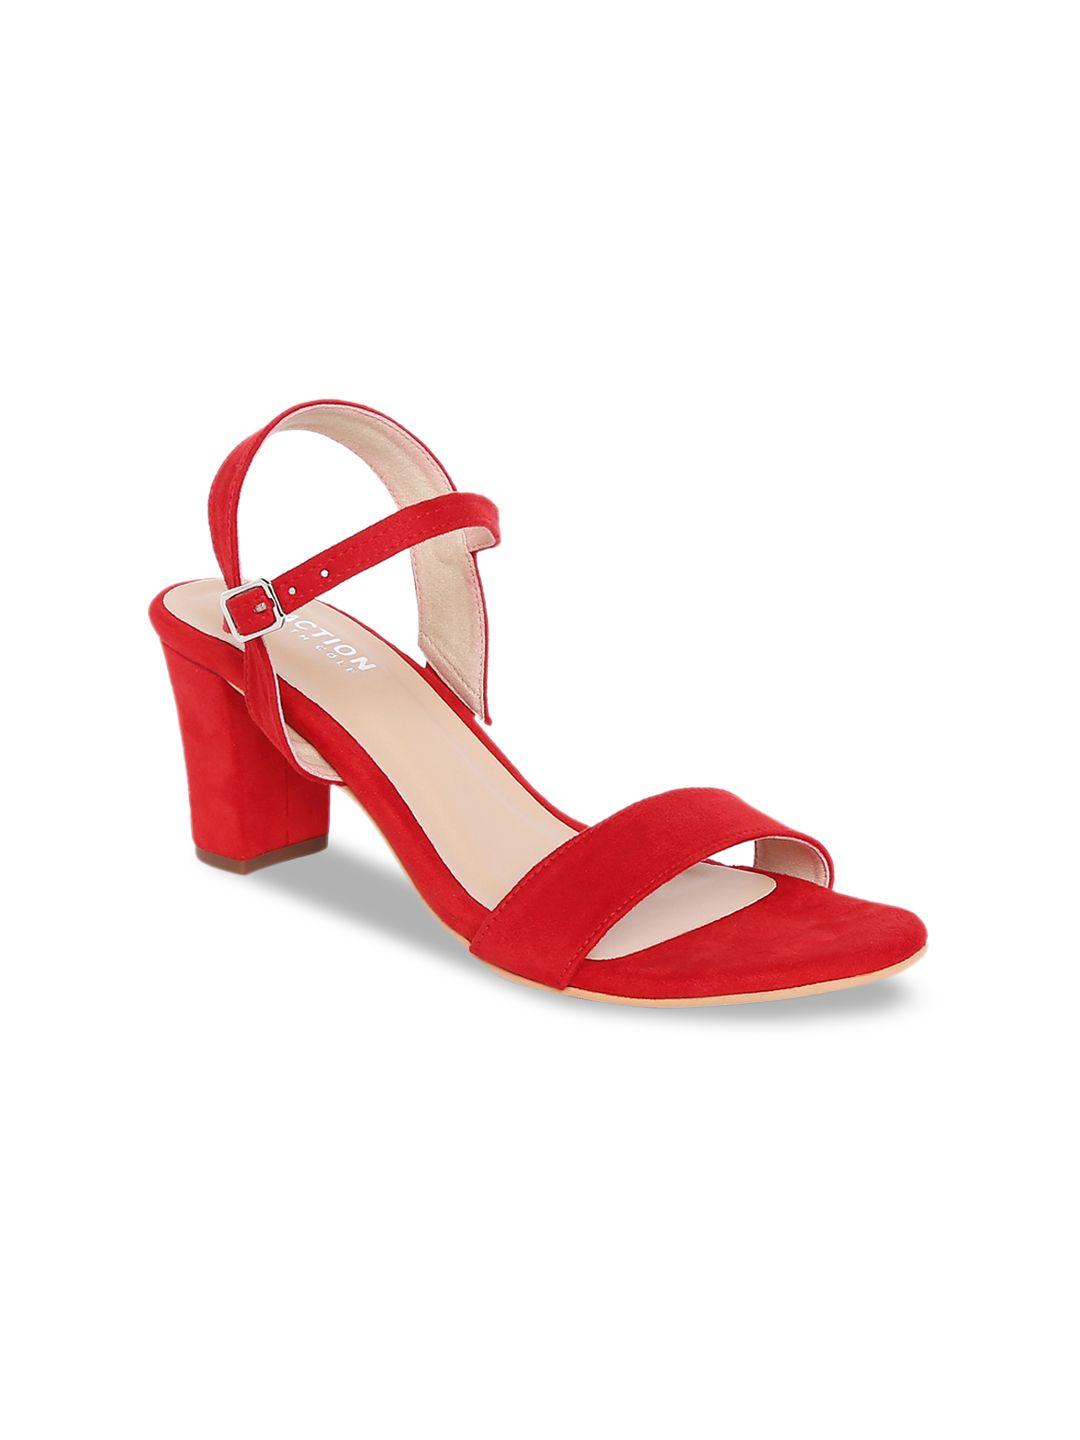 kenneth-cole-women-red-solid-heels